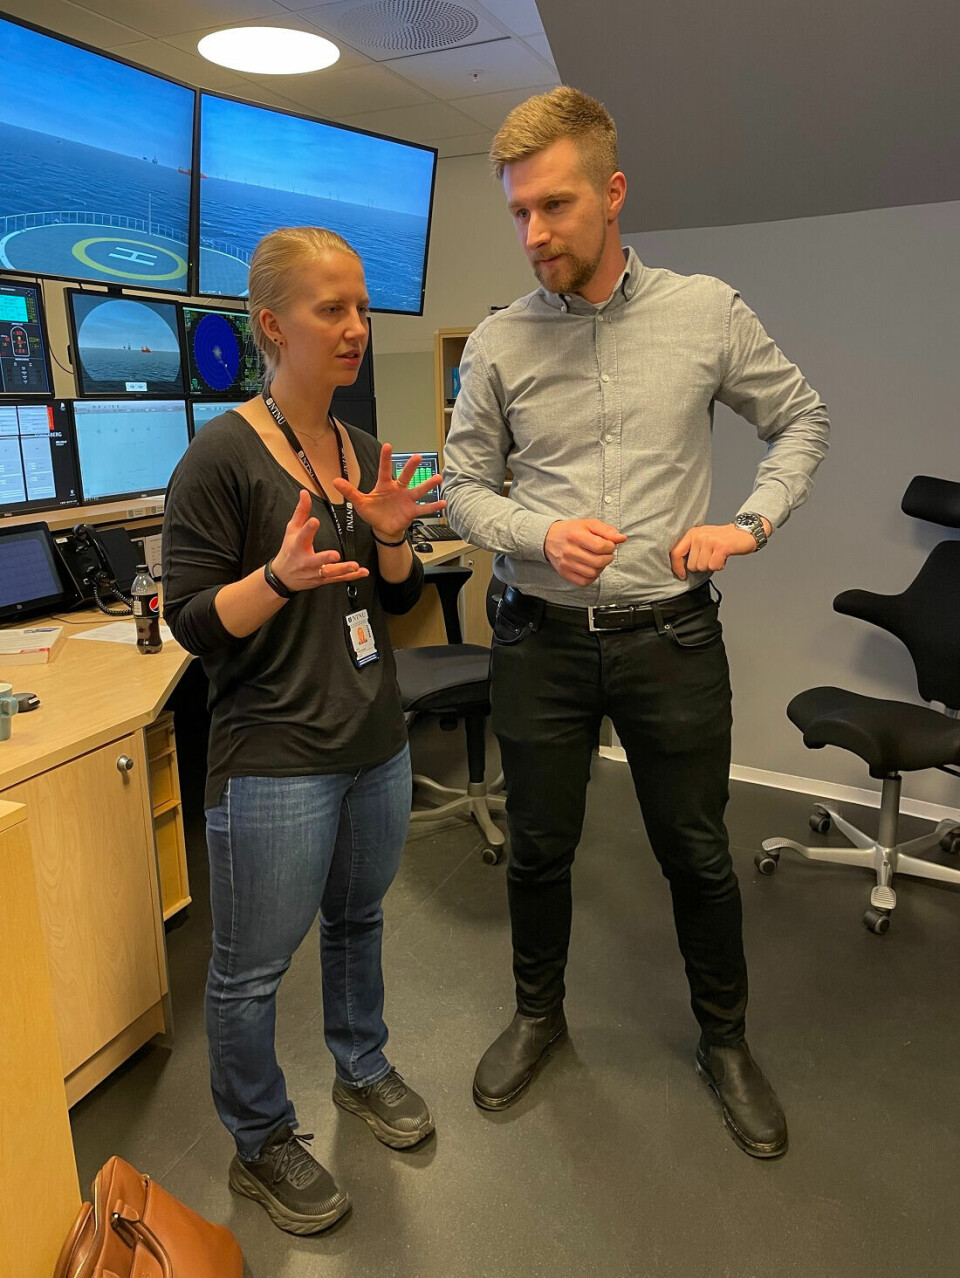 PhD candidates Marie Haugli-Sandvik and Erlend Erstad are studying maritime digital security and have developed a course together, thought to be the first of its kind in Norway.